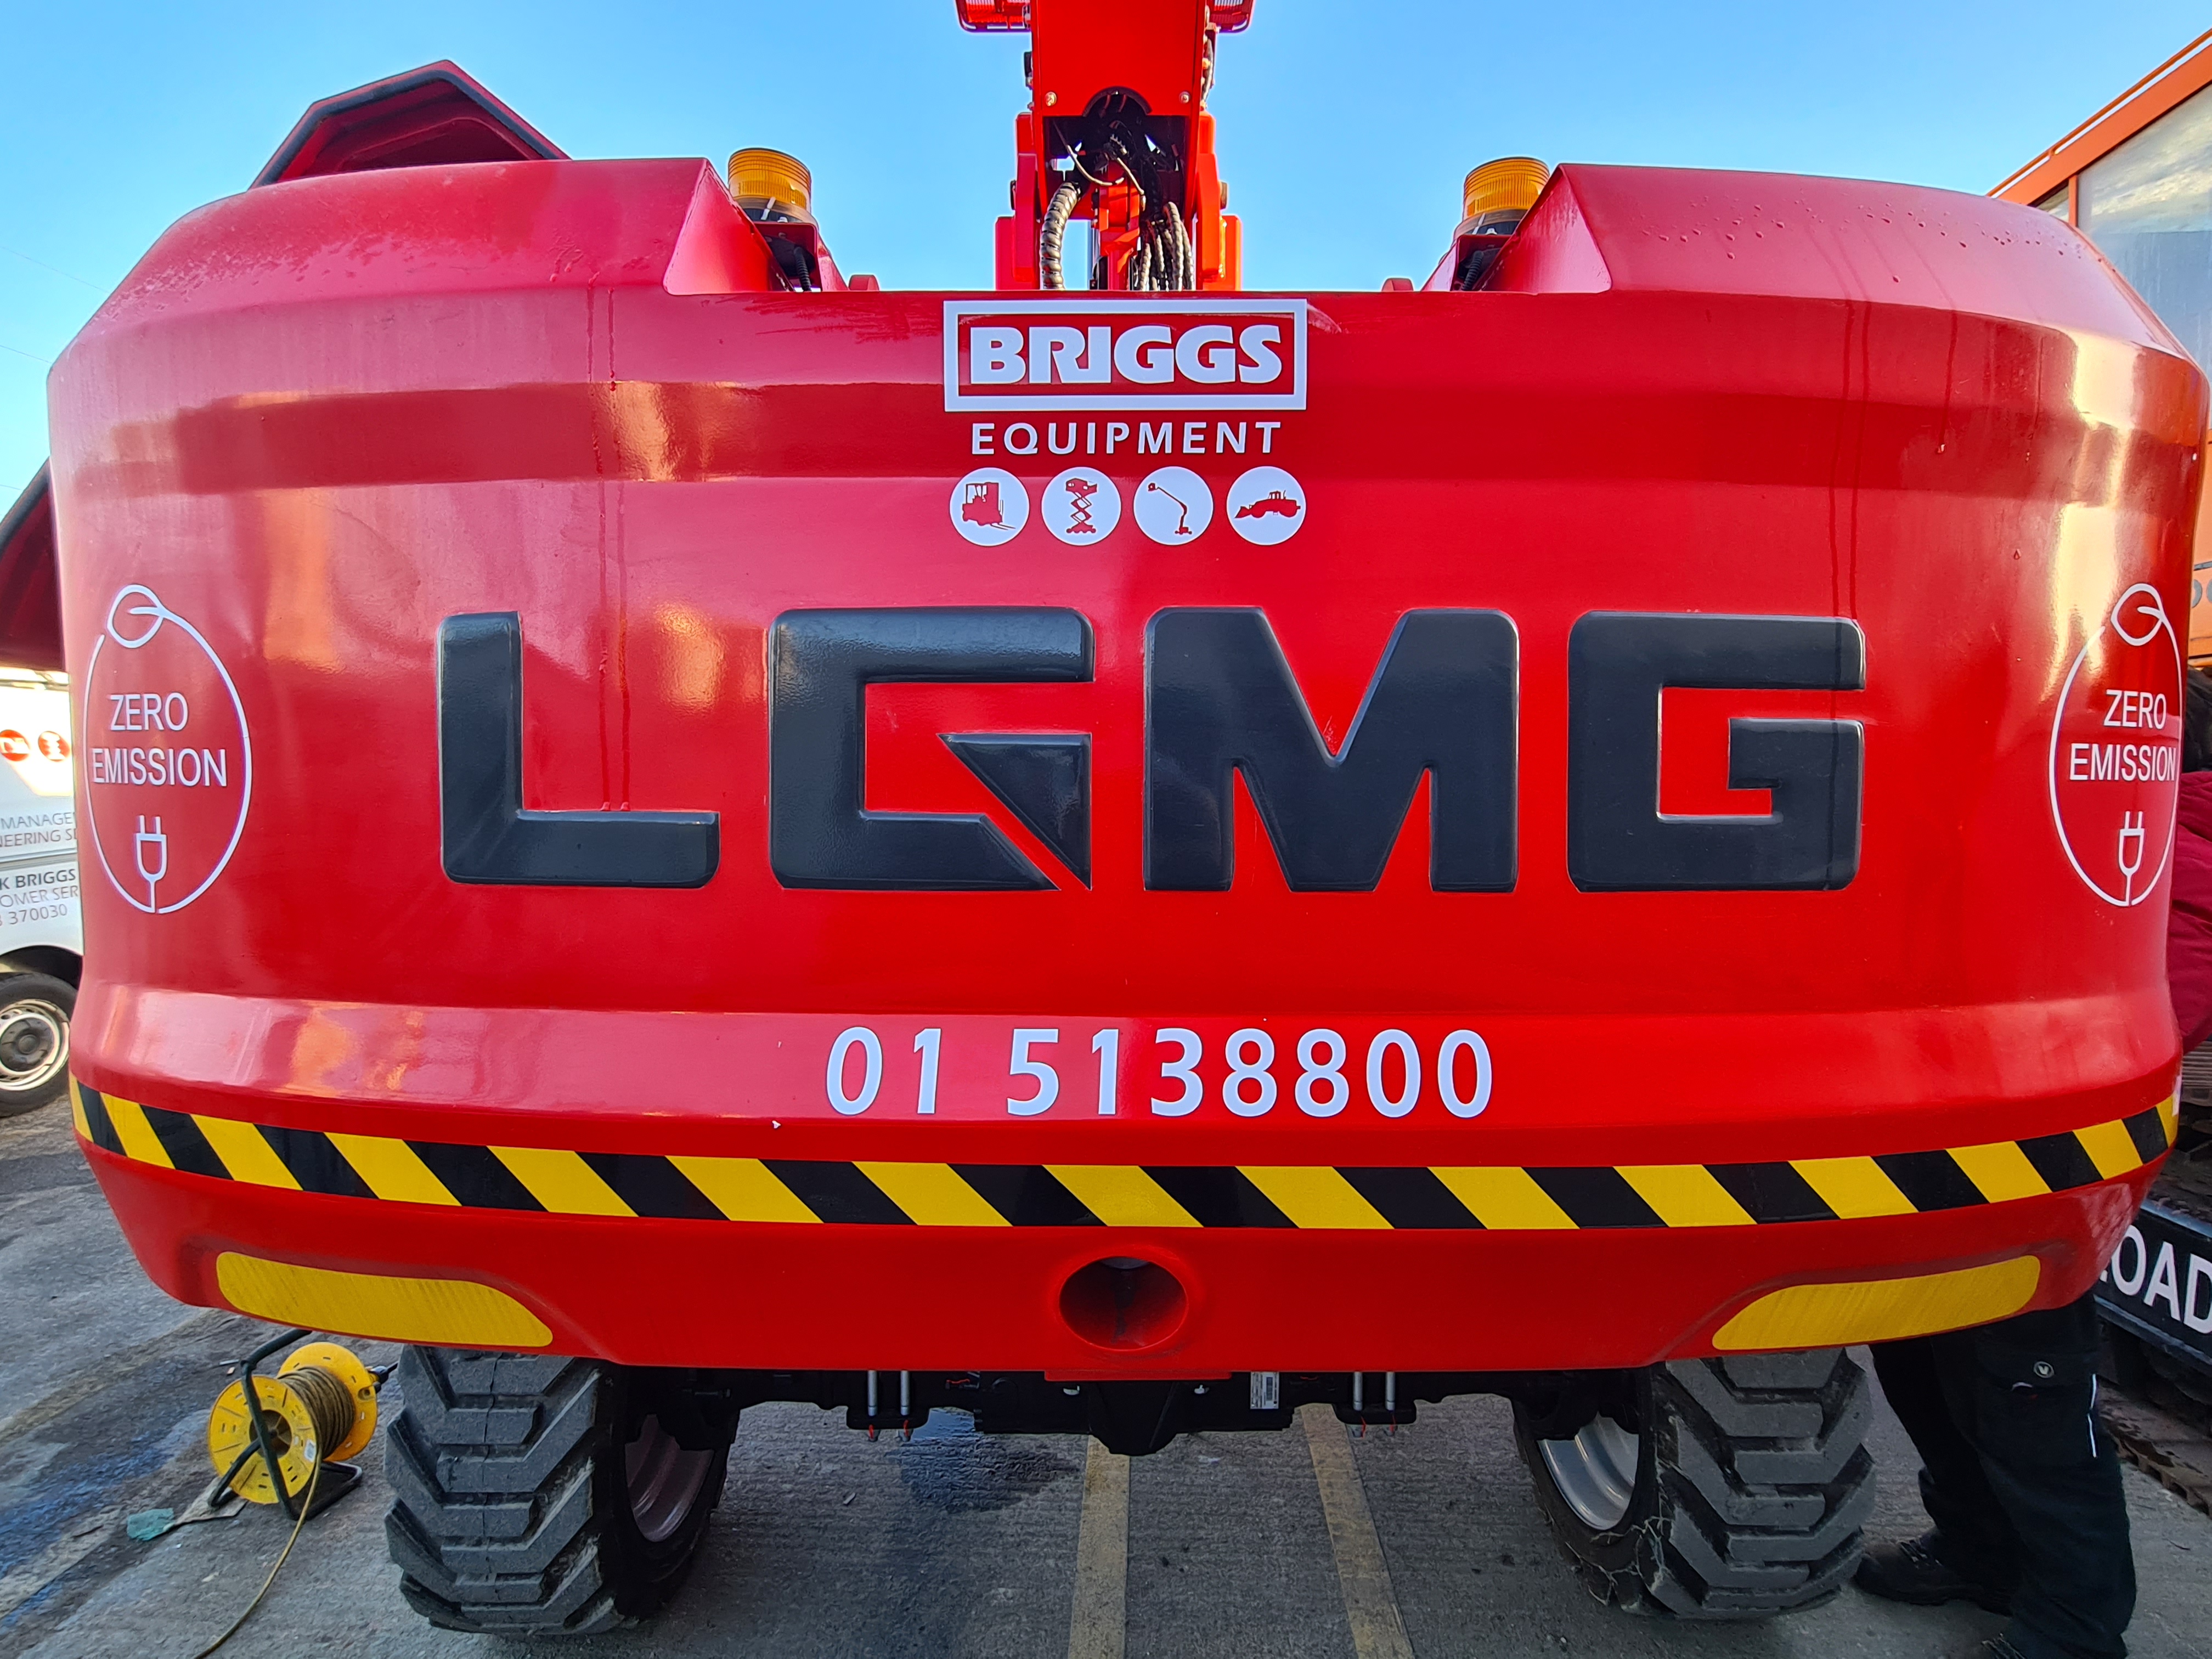 First lithium LGMG rough terrain booms in Europe delivered to Briggs Equipment 